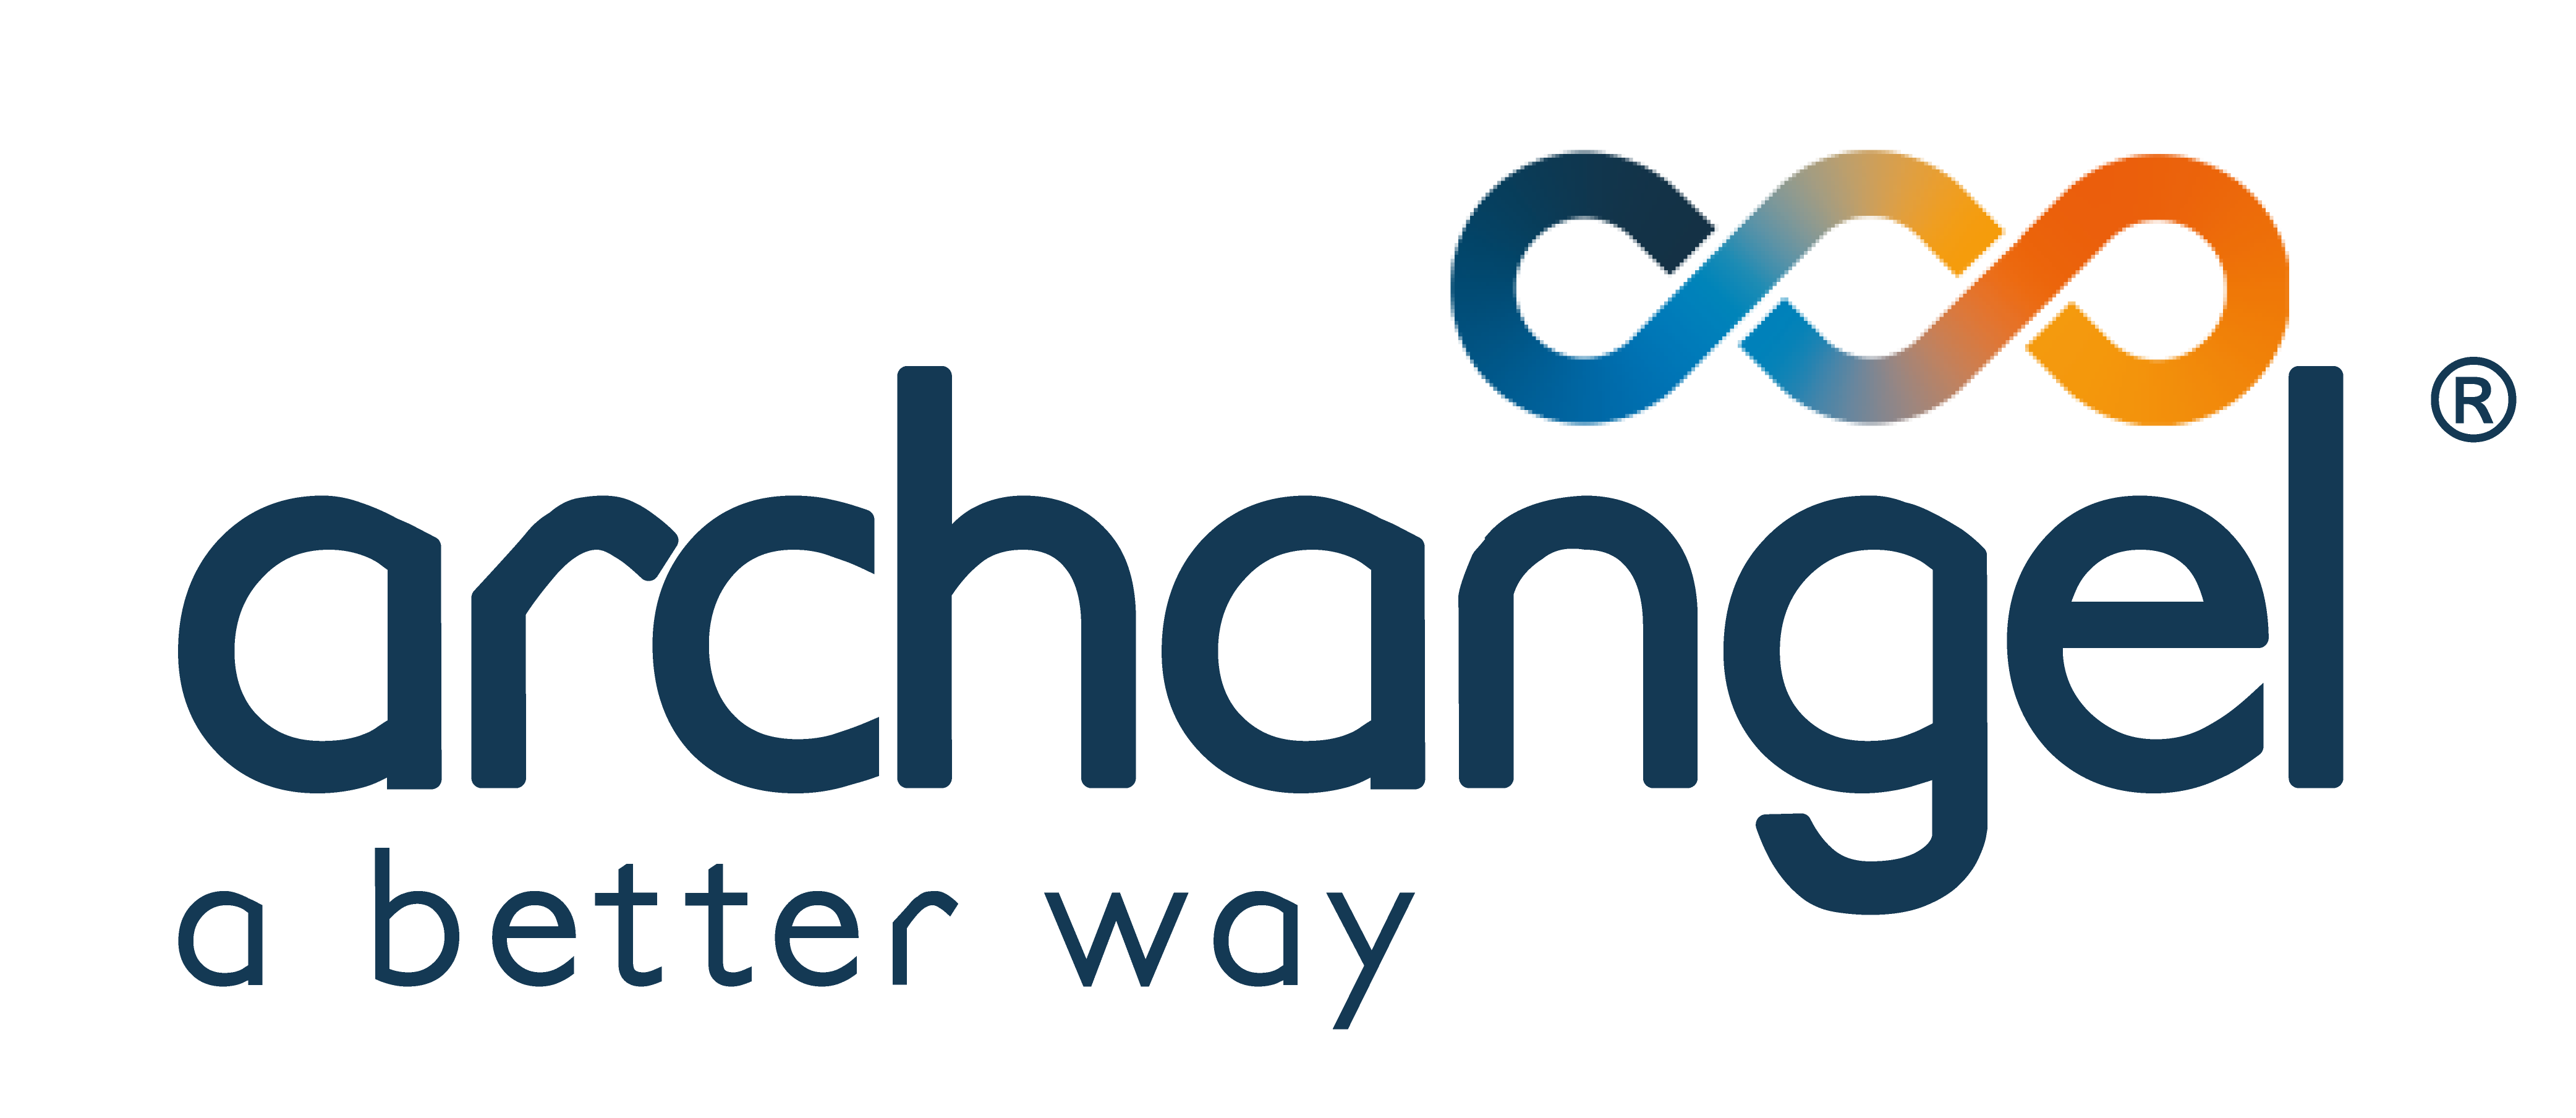 The Archangel logo, which is written in lower case letters in navy blue with a better way written underneath. It has a orange and blue symbol above the lettering